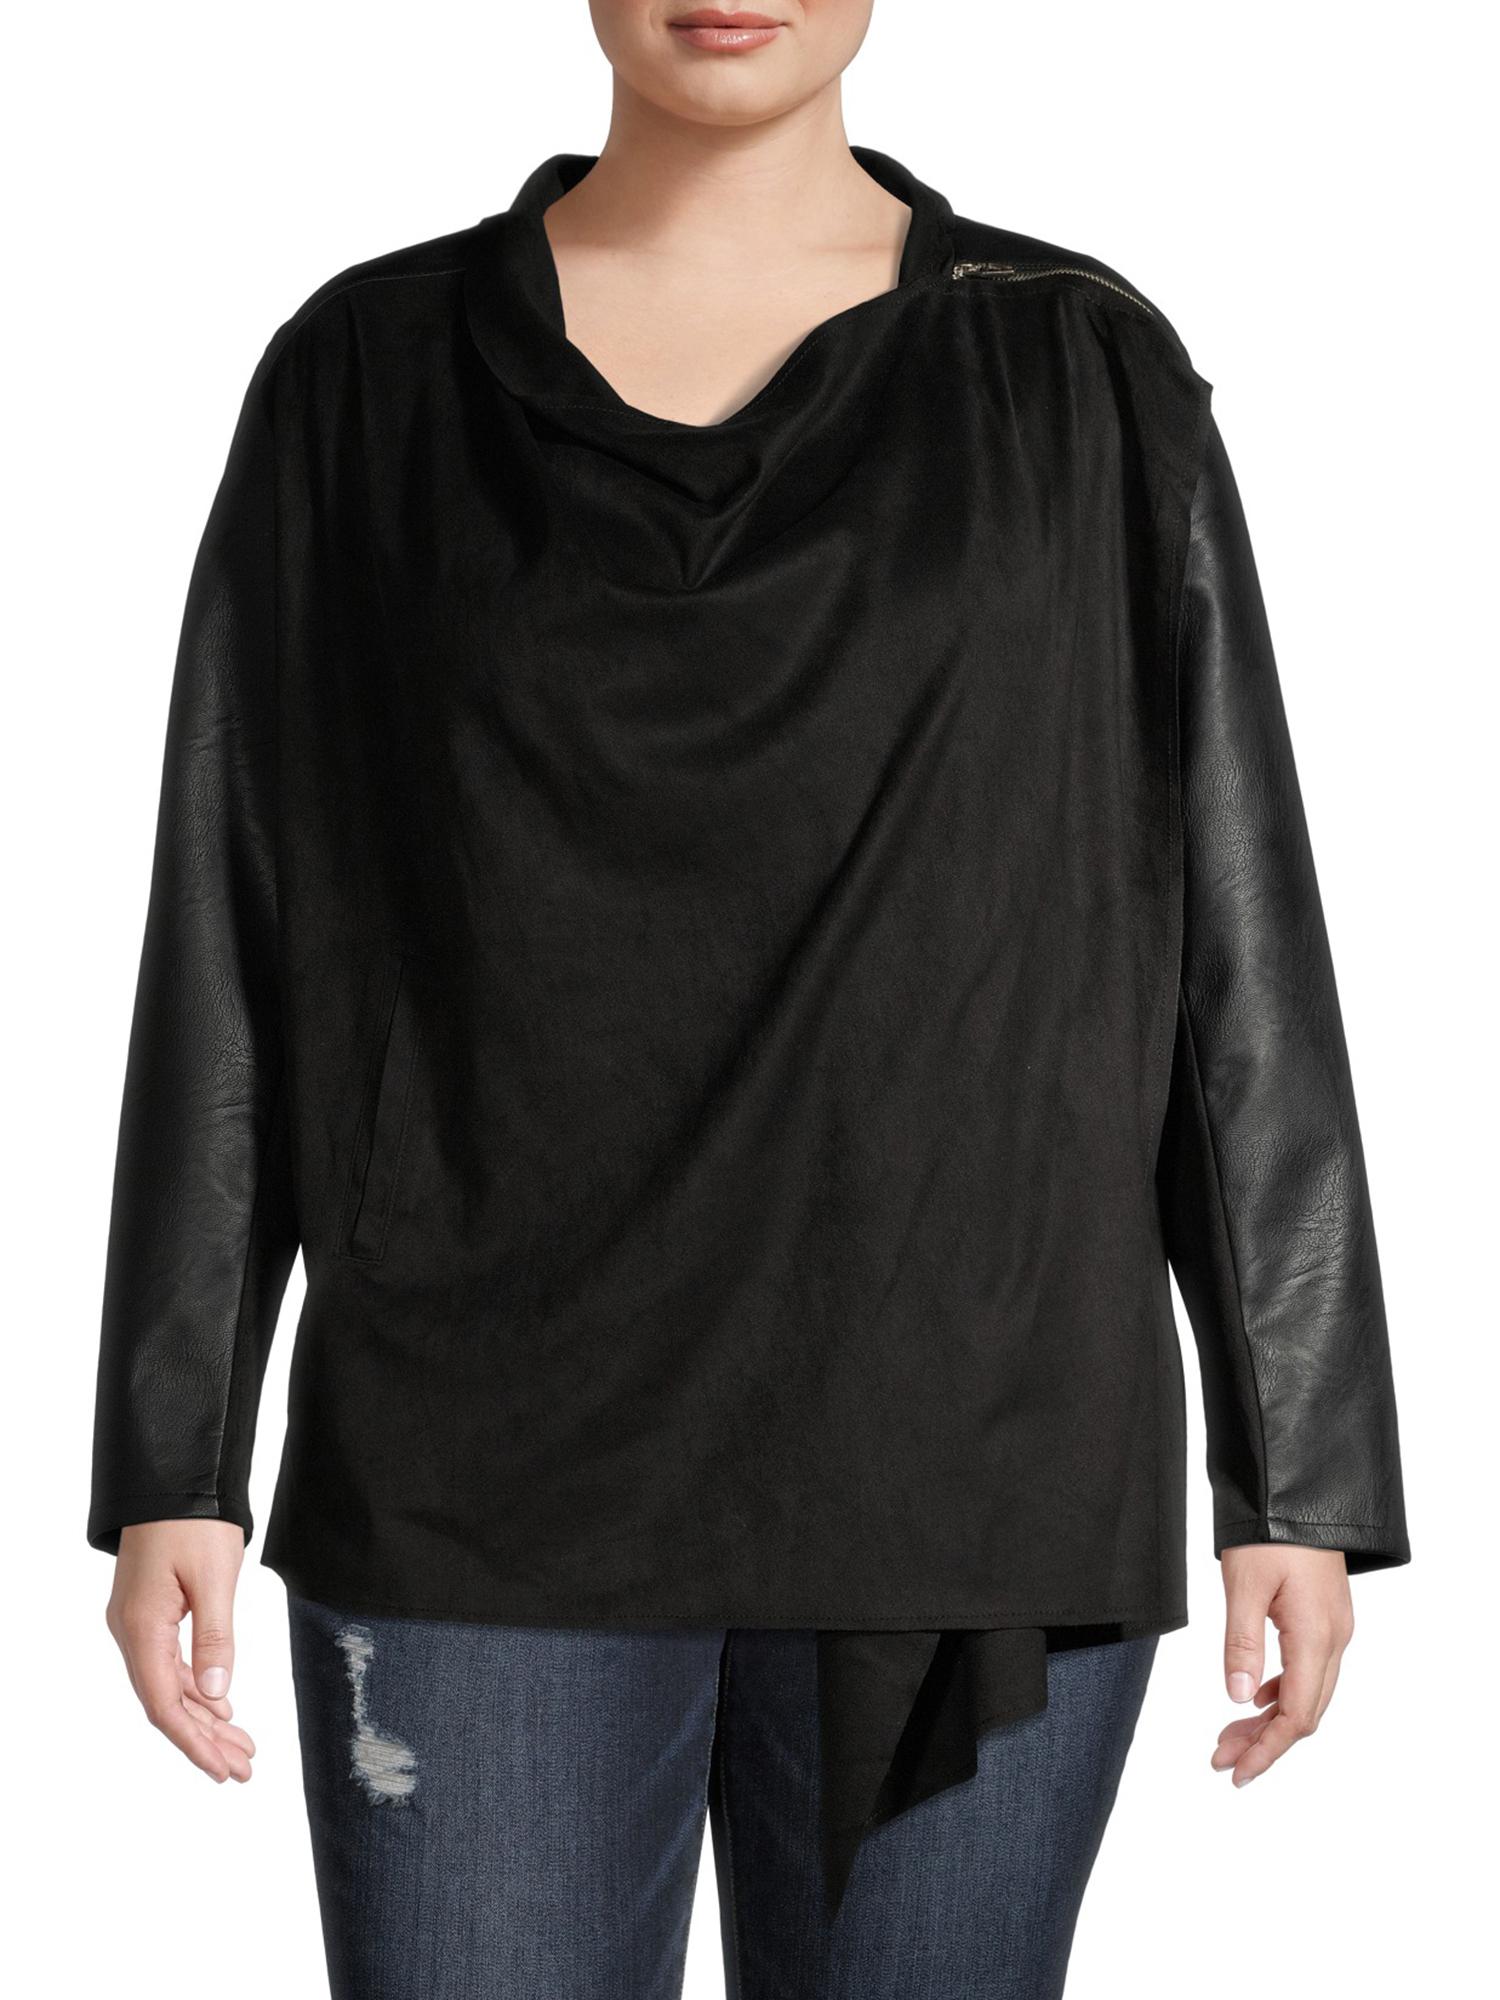 Alivia Ford Women's Plus Size Drape Front Vegan Leather Jacket with